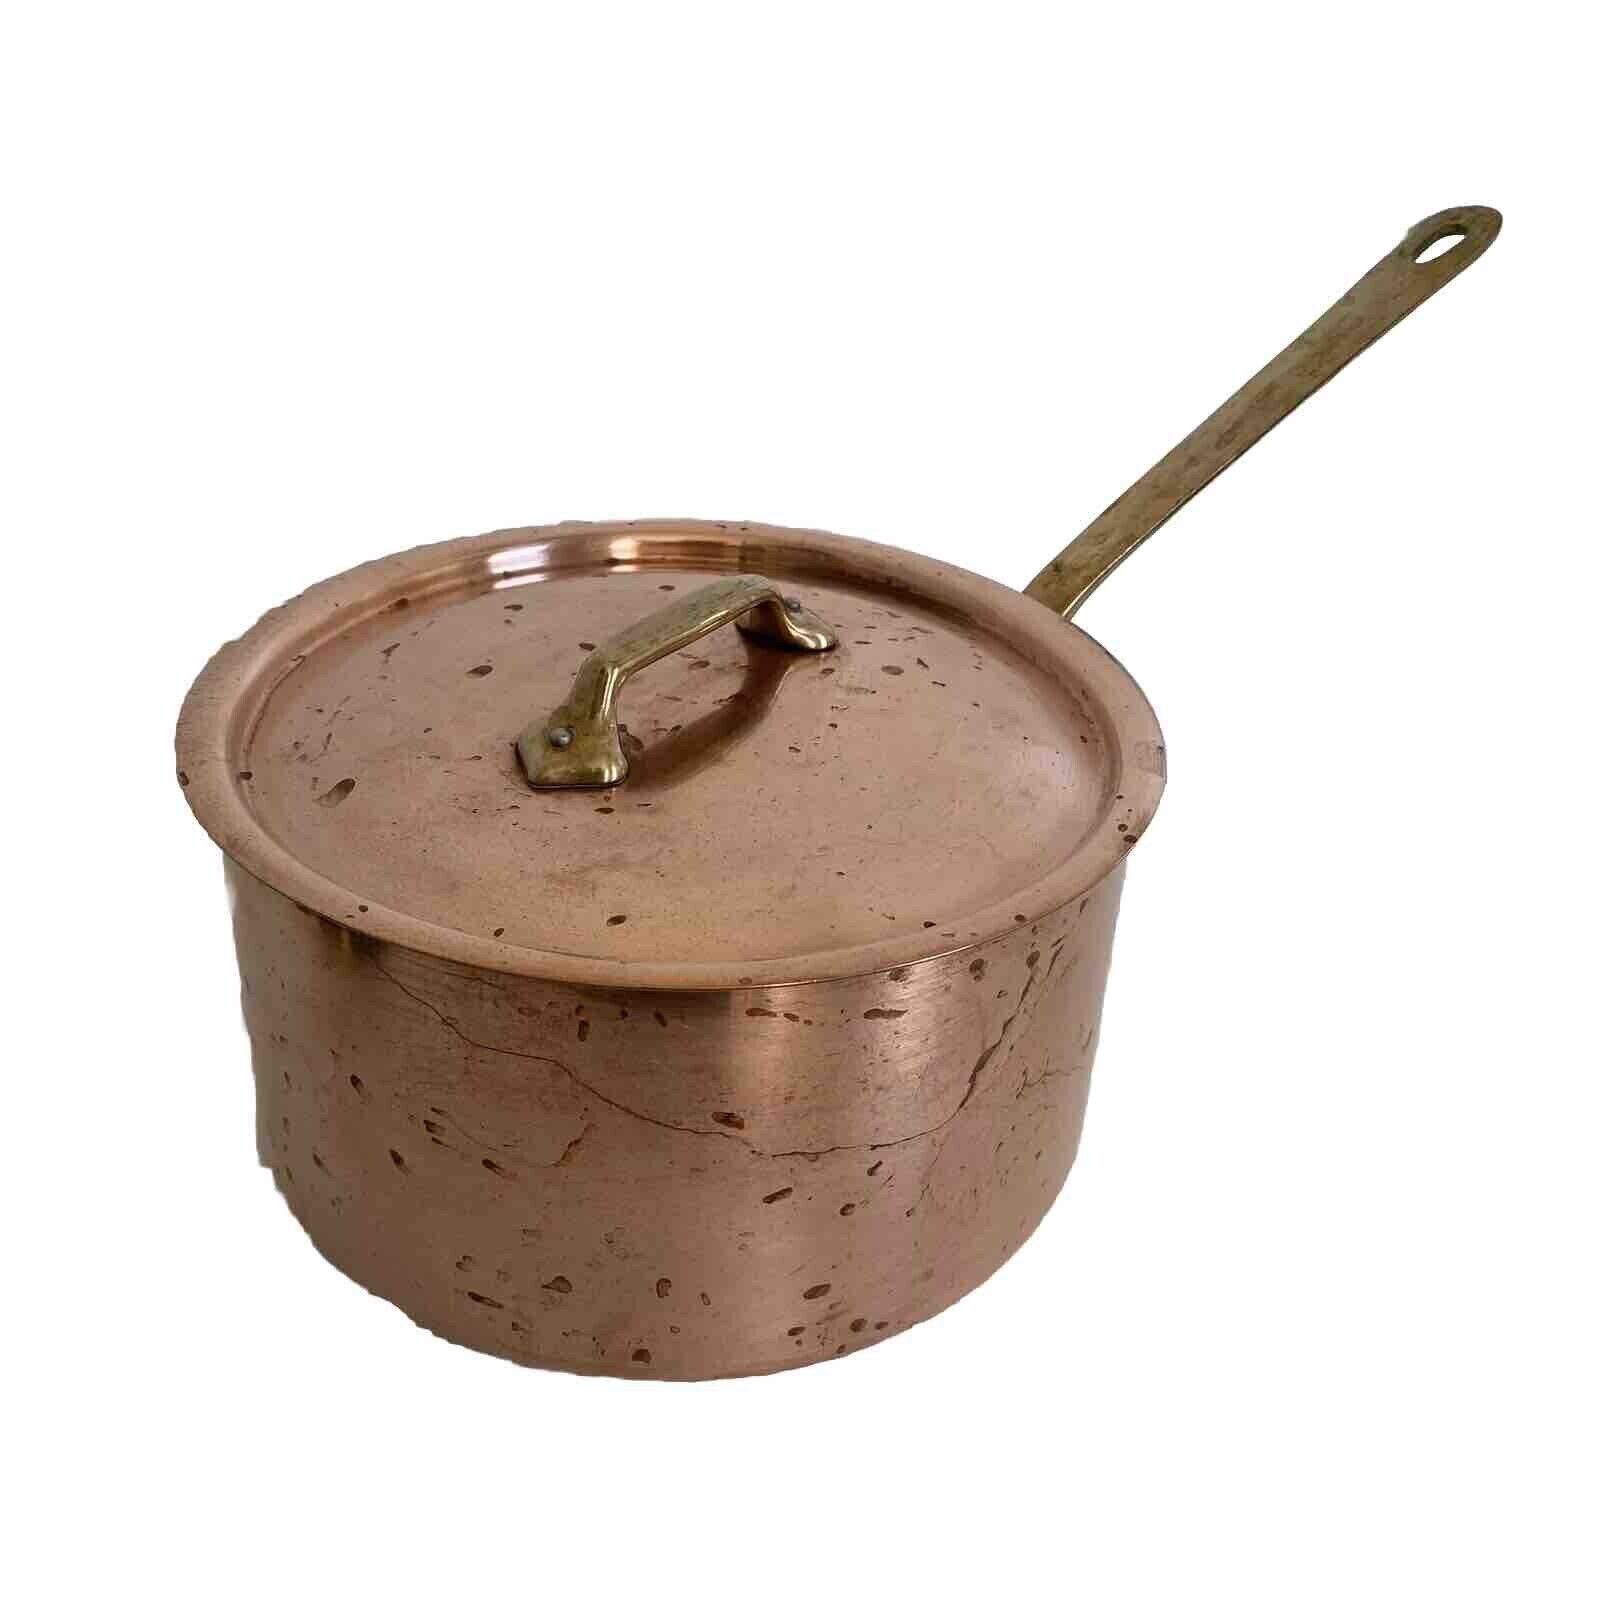 Vintage Copper Pot Sauce Pan Brass Handle Made In France Heavy 8” x 4 3/8”